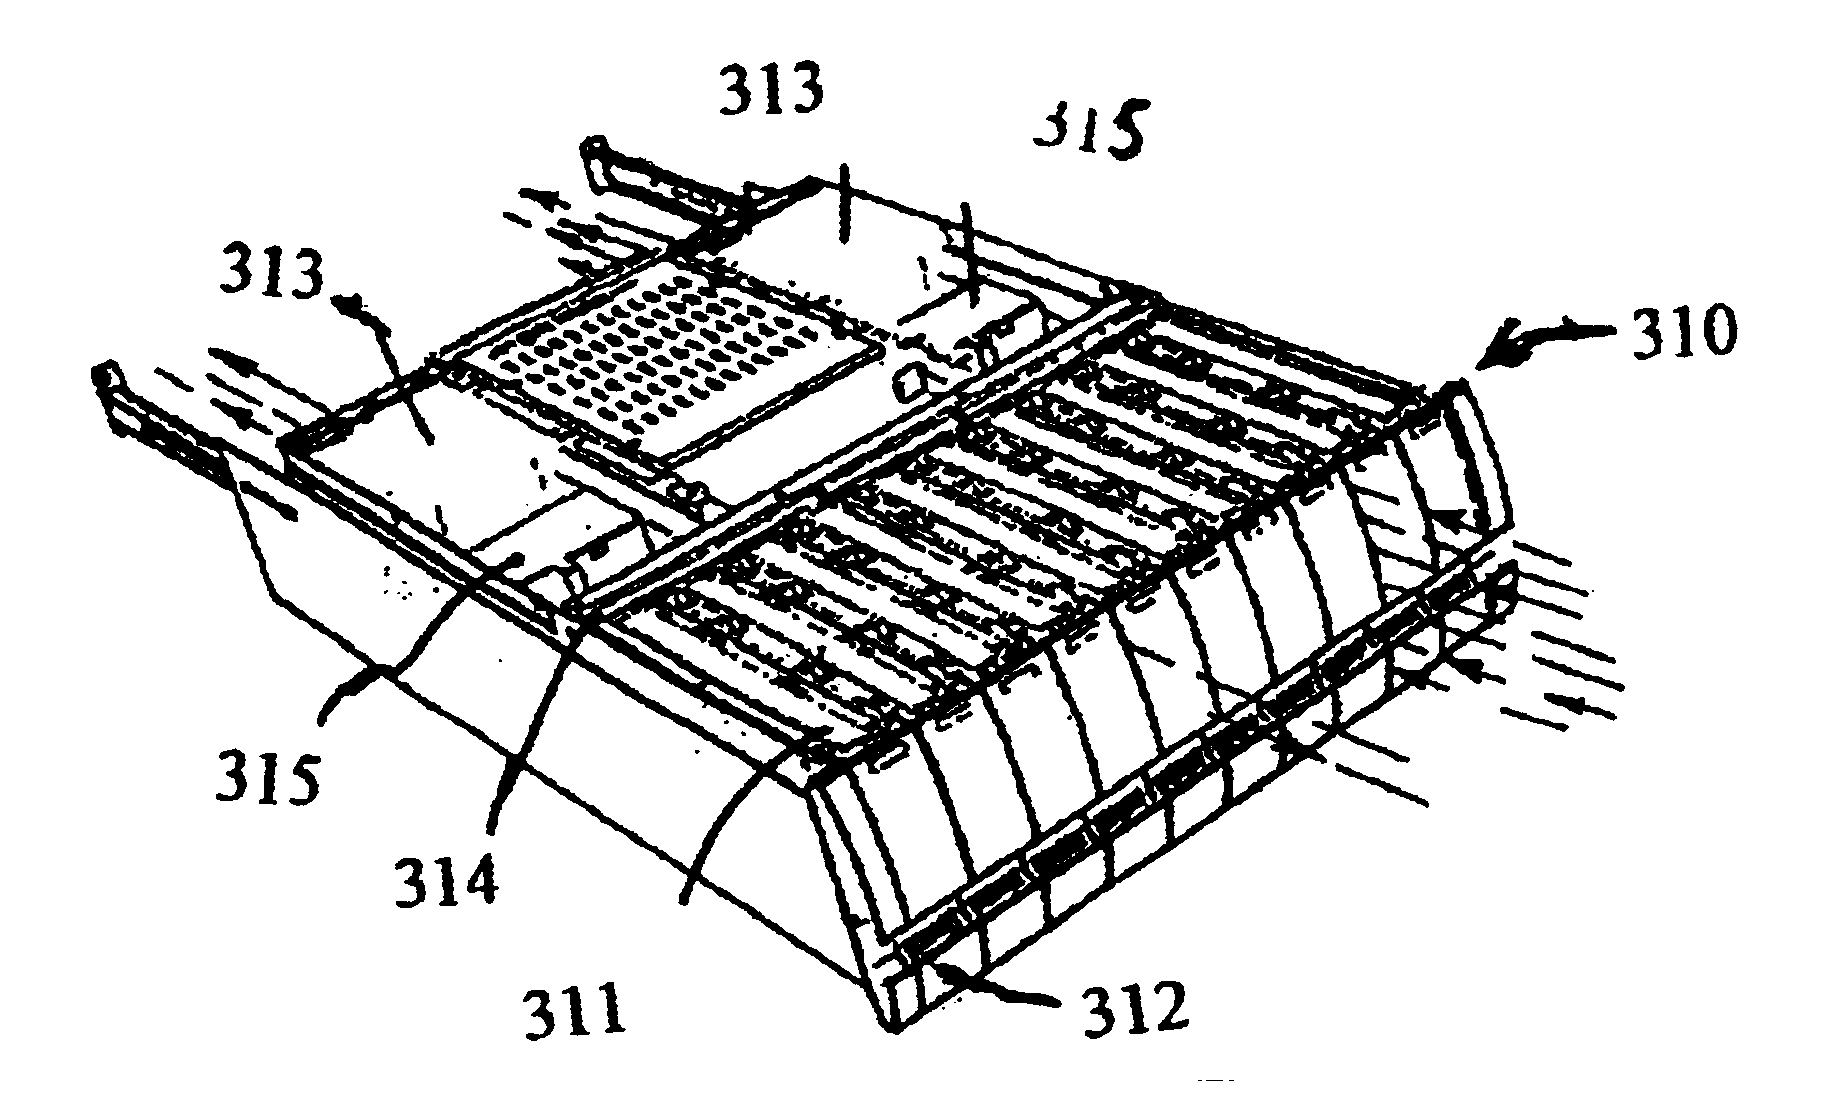 Enclosure for computer peripheral devices